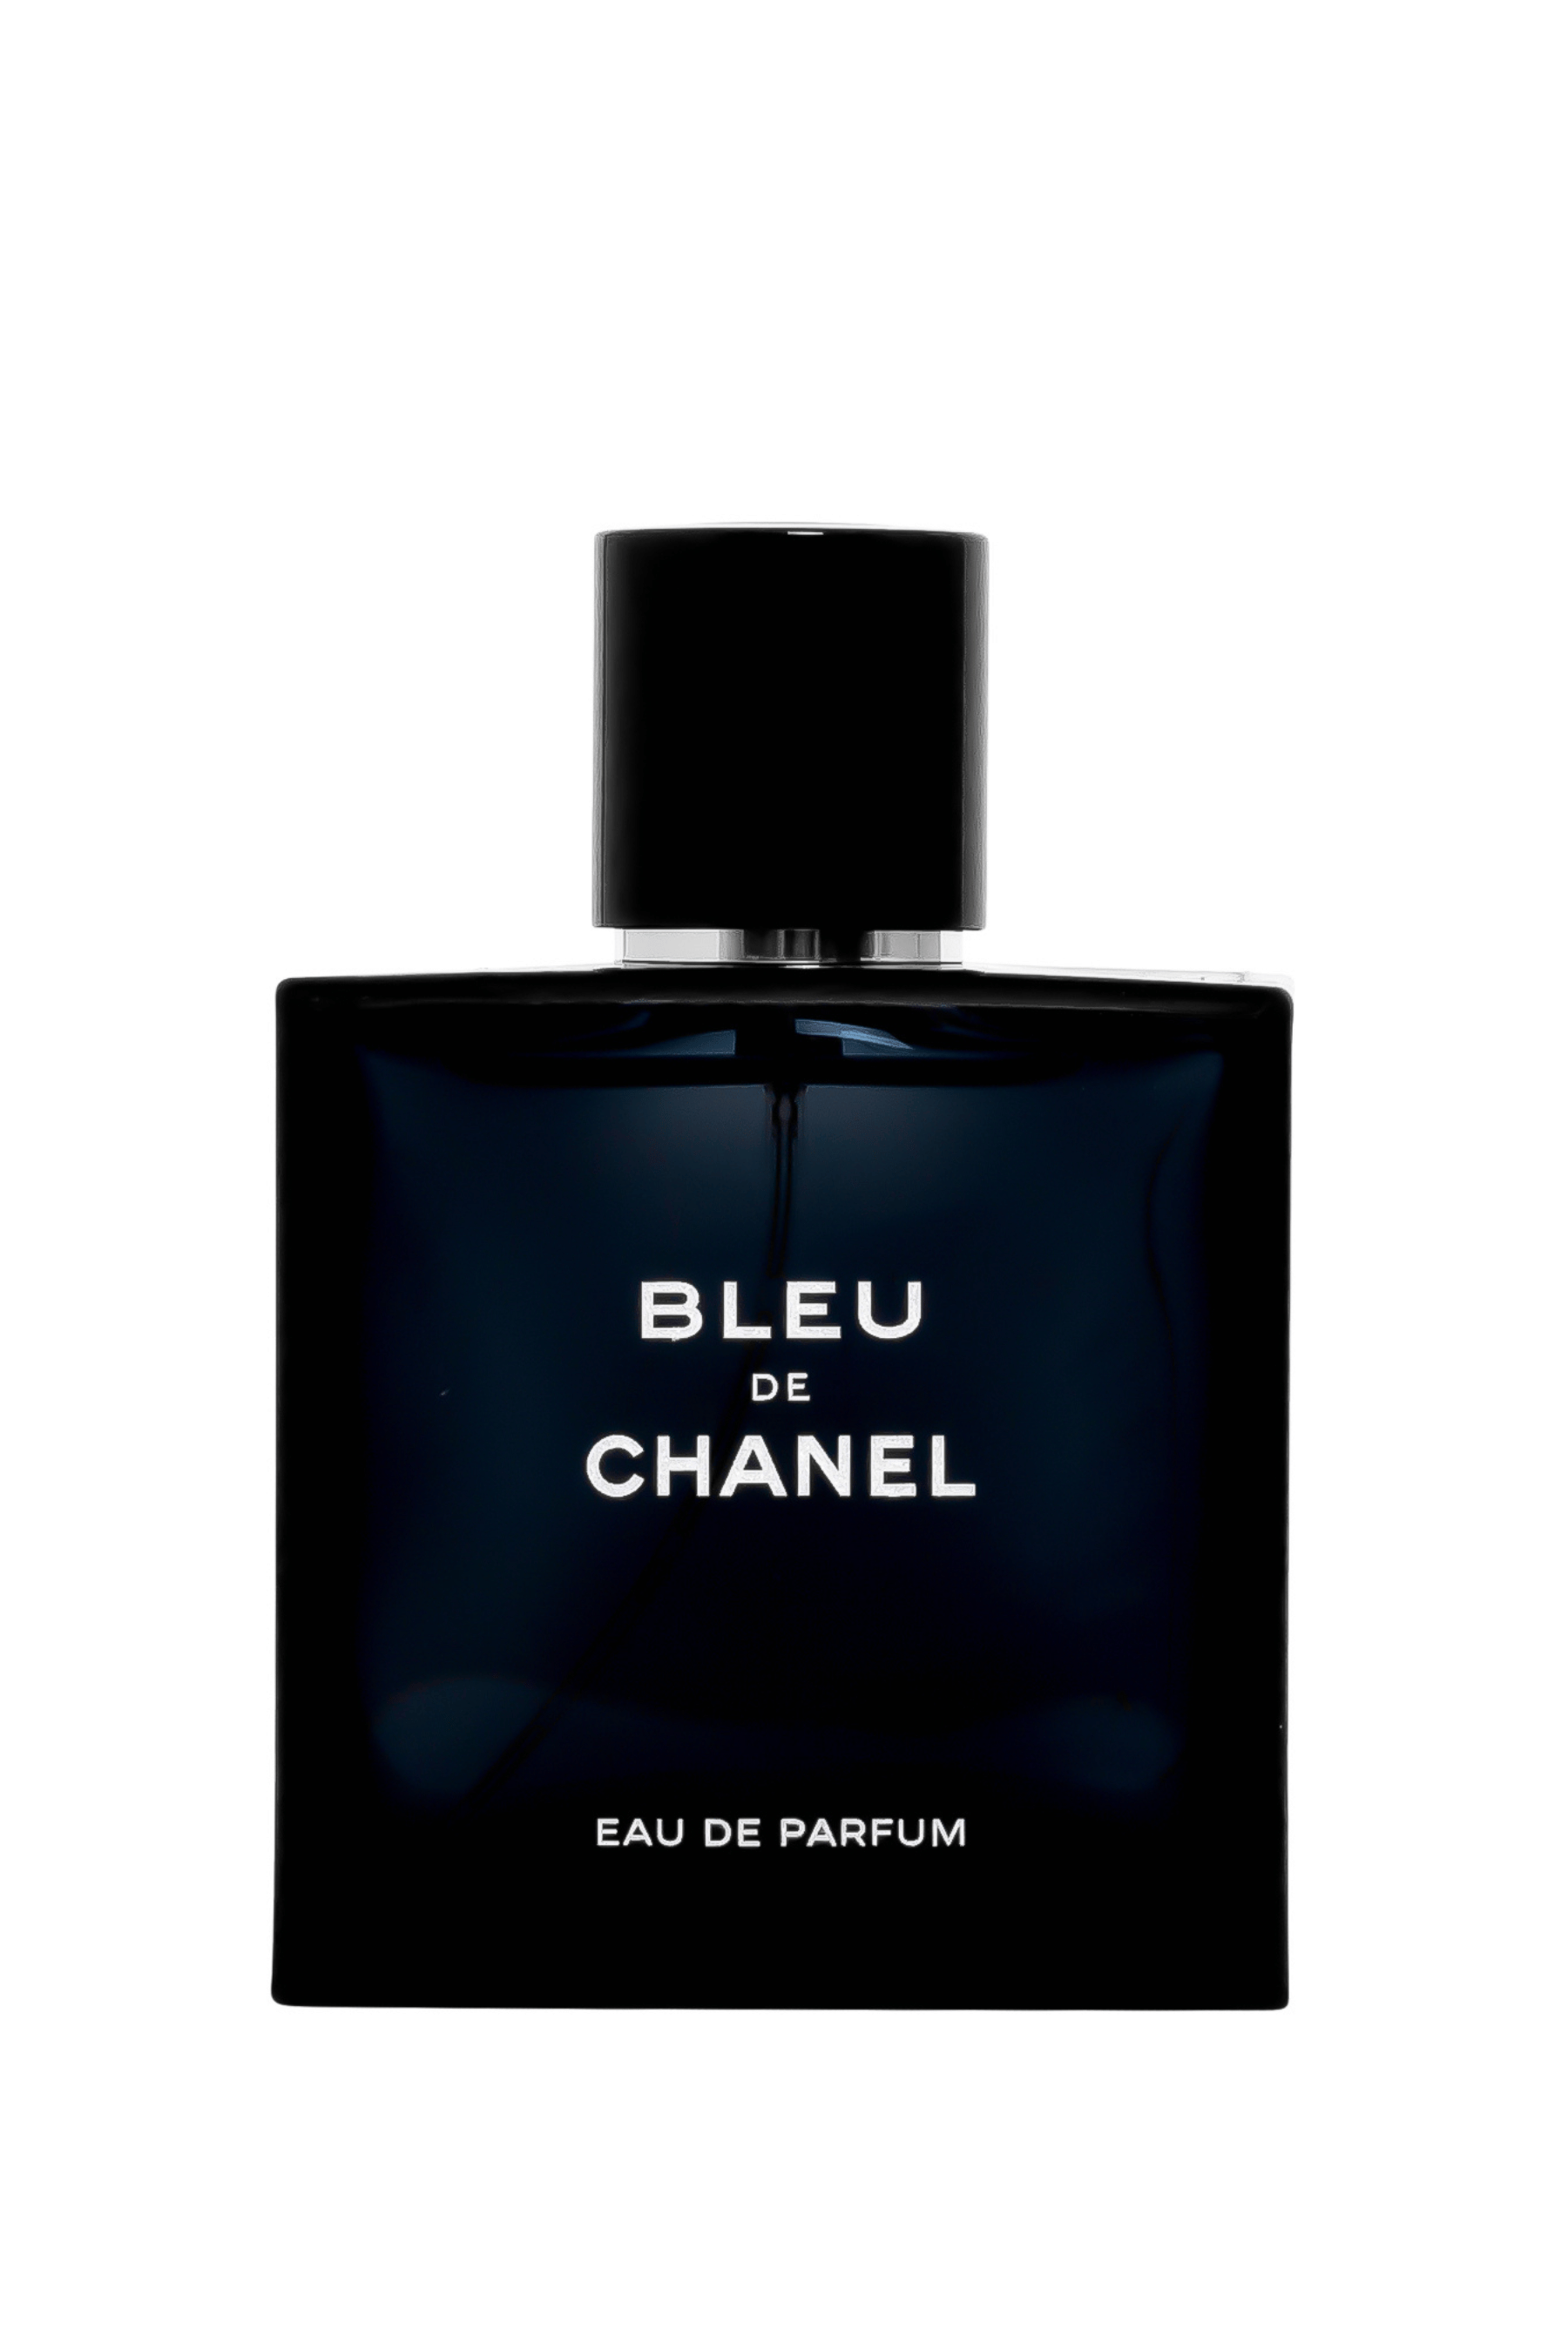 BEFORE YOU BUY  Chanel Allure Homme Sport Eau Extreme - A Mint Fresh Clean  Men's Fragrance Review 